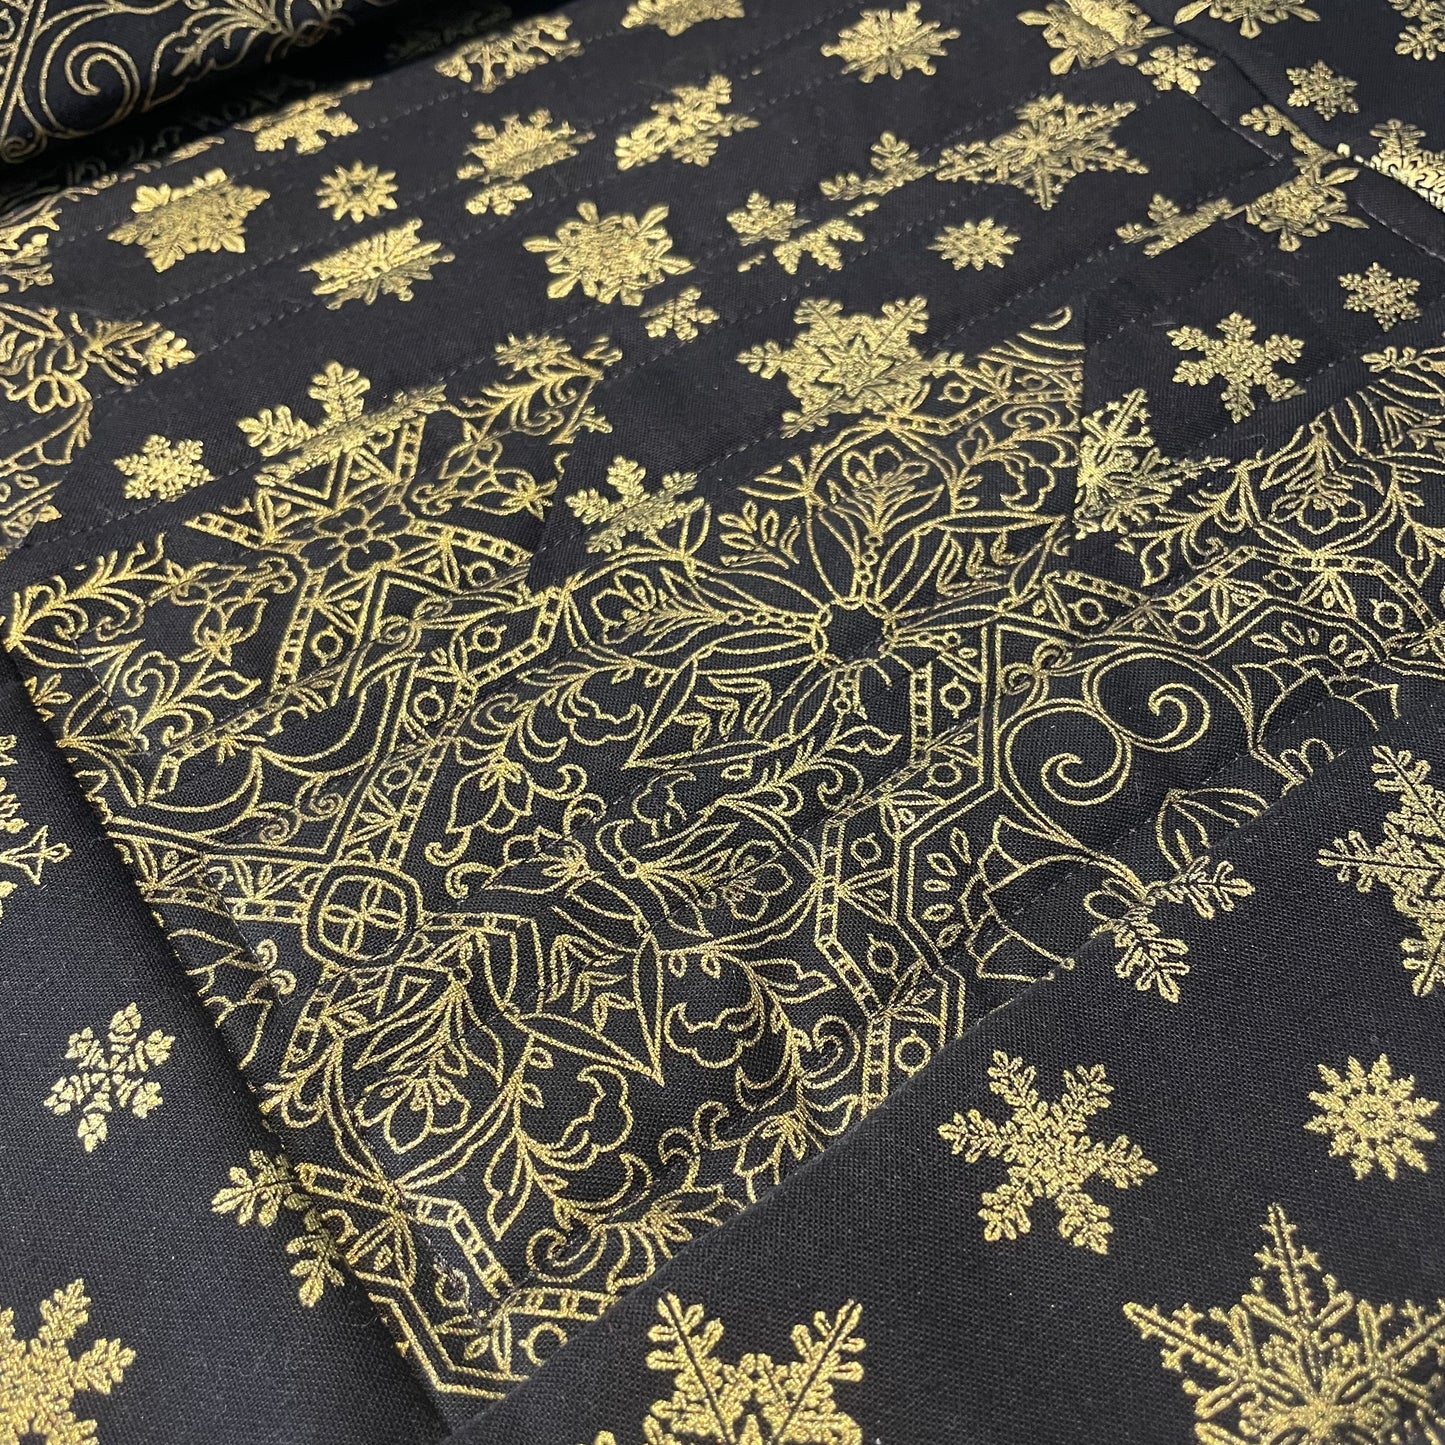 Black and Gold Snowflake Quilted Table Runner - Home Stitchery Decor